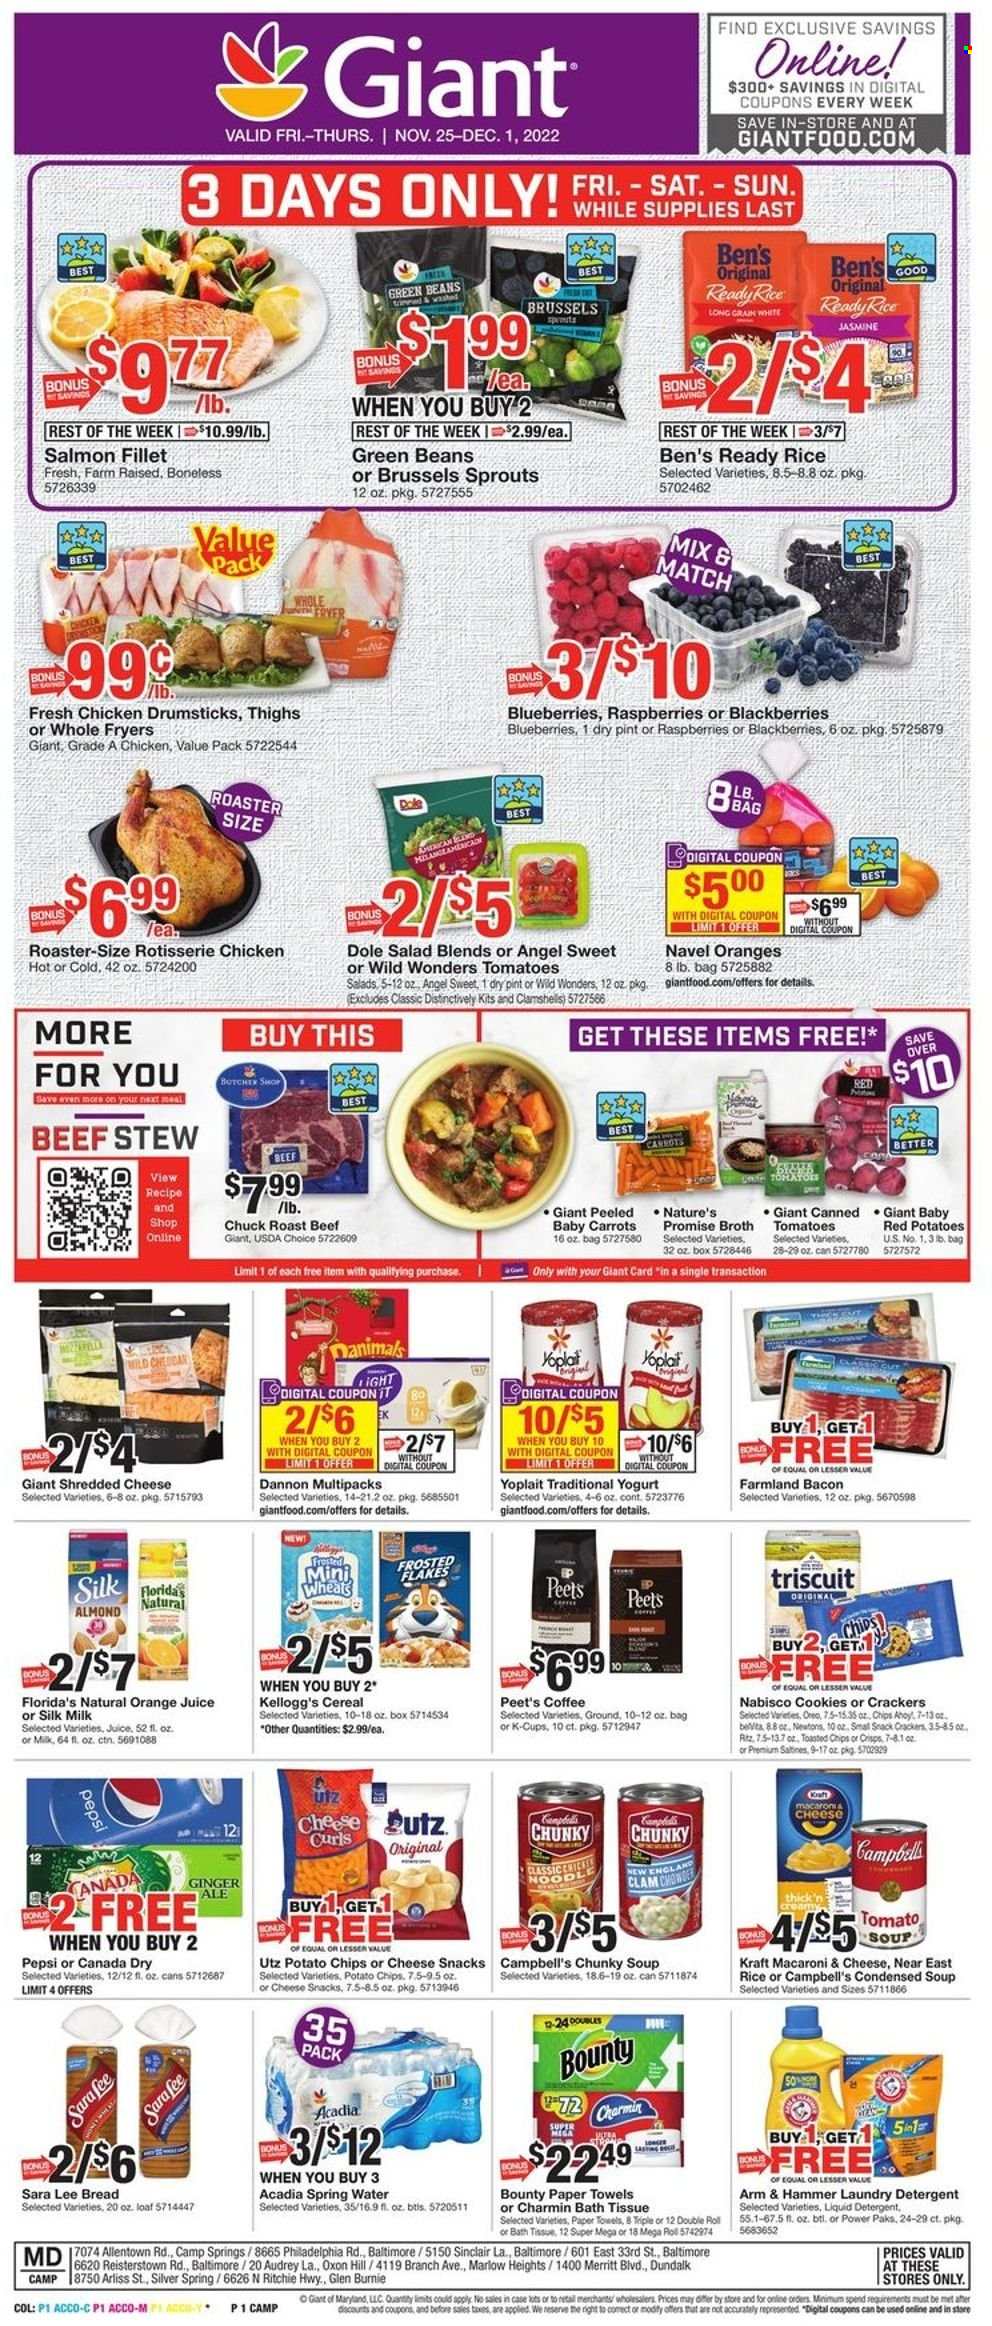 thumbnail - Giant Food Flyer - 11/25/2022 - 12/01/2022 - Sales products - bread, Nature’s Promise, Sara Lee, green beans, tomatoes, Dole, brussel sprouts, red potatoes, blackberries, blueberries, salmon, salmon fillet, Campbell's, macaroni & cheese, tomato soup, chicken roast, condensed soup, soup, instant soup, Kraft®, bacon, mild cheddar, shredded cheese, Oreo, yoghurt, Yoplait, Dannon, milk, cookies, snack, Bounty, crackers, Kellogg's, Florida's Natural, RITZ, potato chips, chips, saltines, ARM & HAMMER, broth, clam chowder, cereals, Canada Dry, ginger ale, Pepsi, orange juice, juice, spring water, Acadia, coffee, coffee capsules, K-Cups, chicken drumsticks, beef meat, roast beef, chuck roast, bath tissue, kitchen towels, paper towels, Charmin, detergent, liquid detergent, laundry detergent, navel oranges. Page 1.